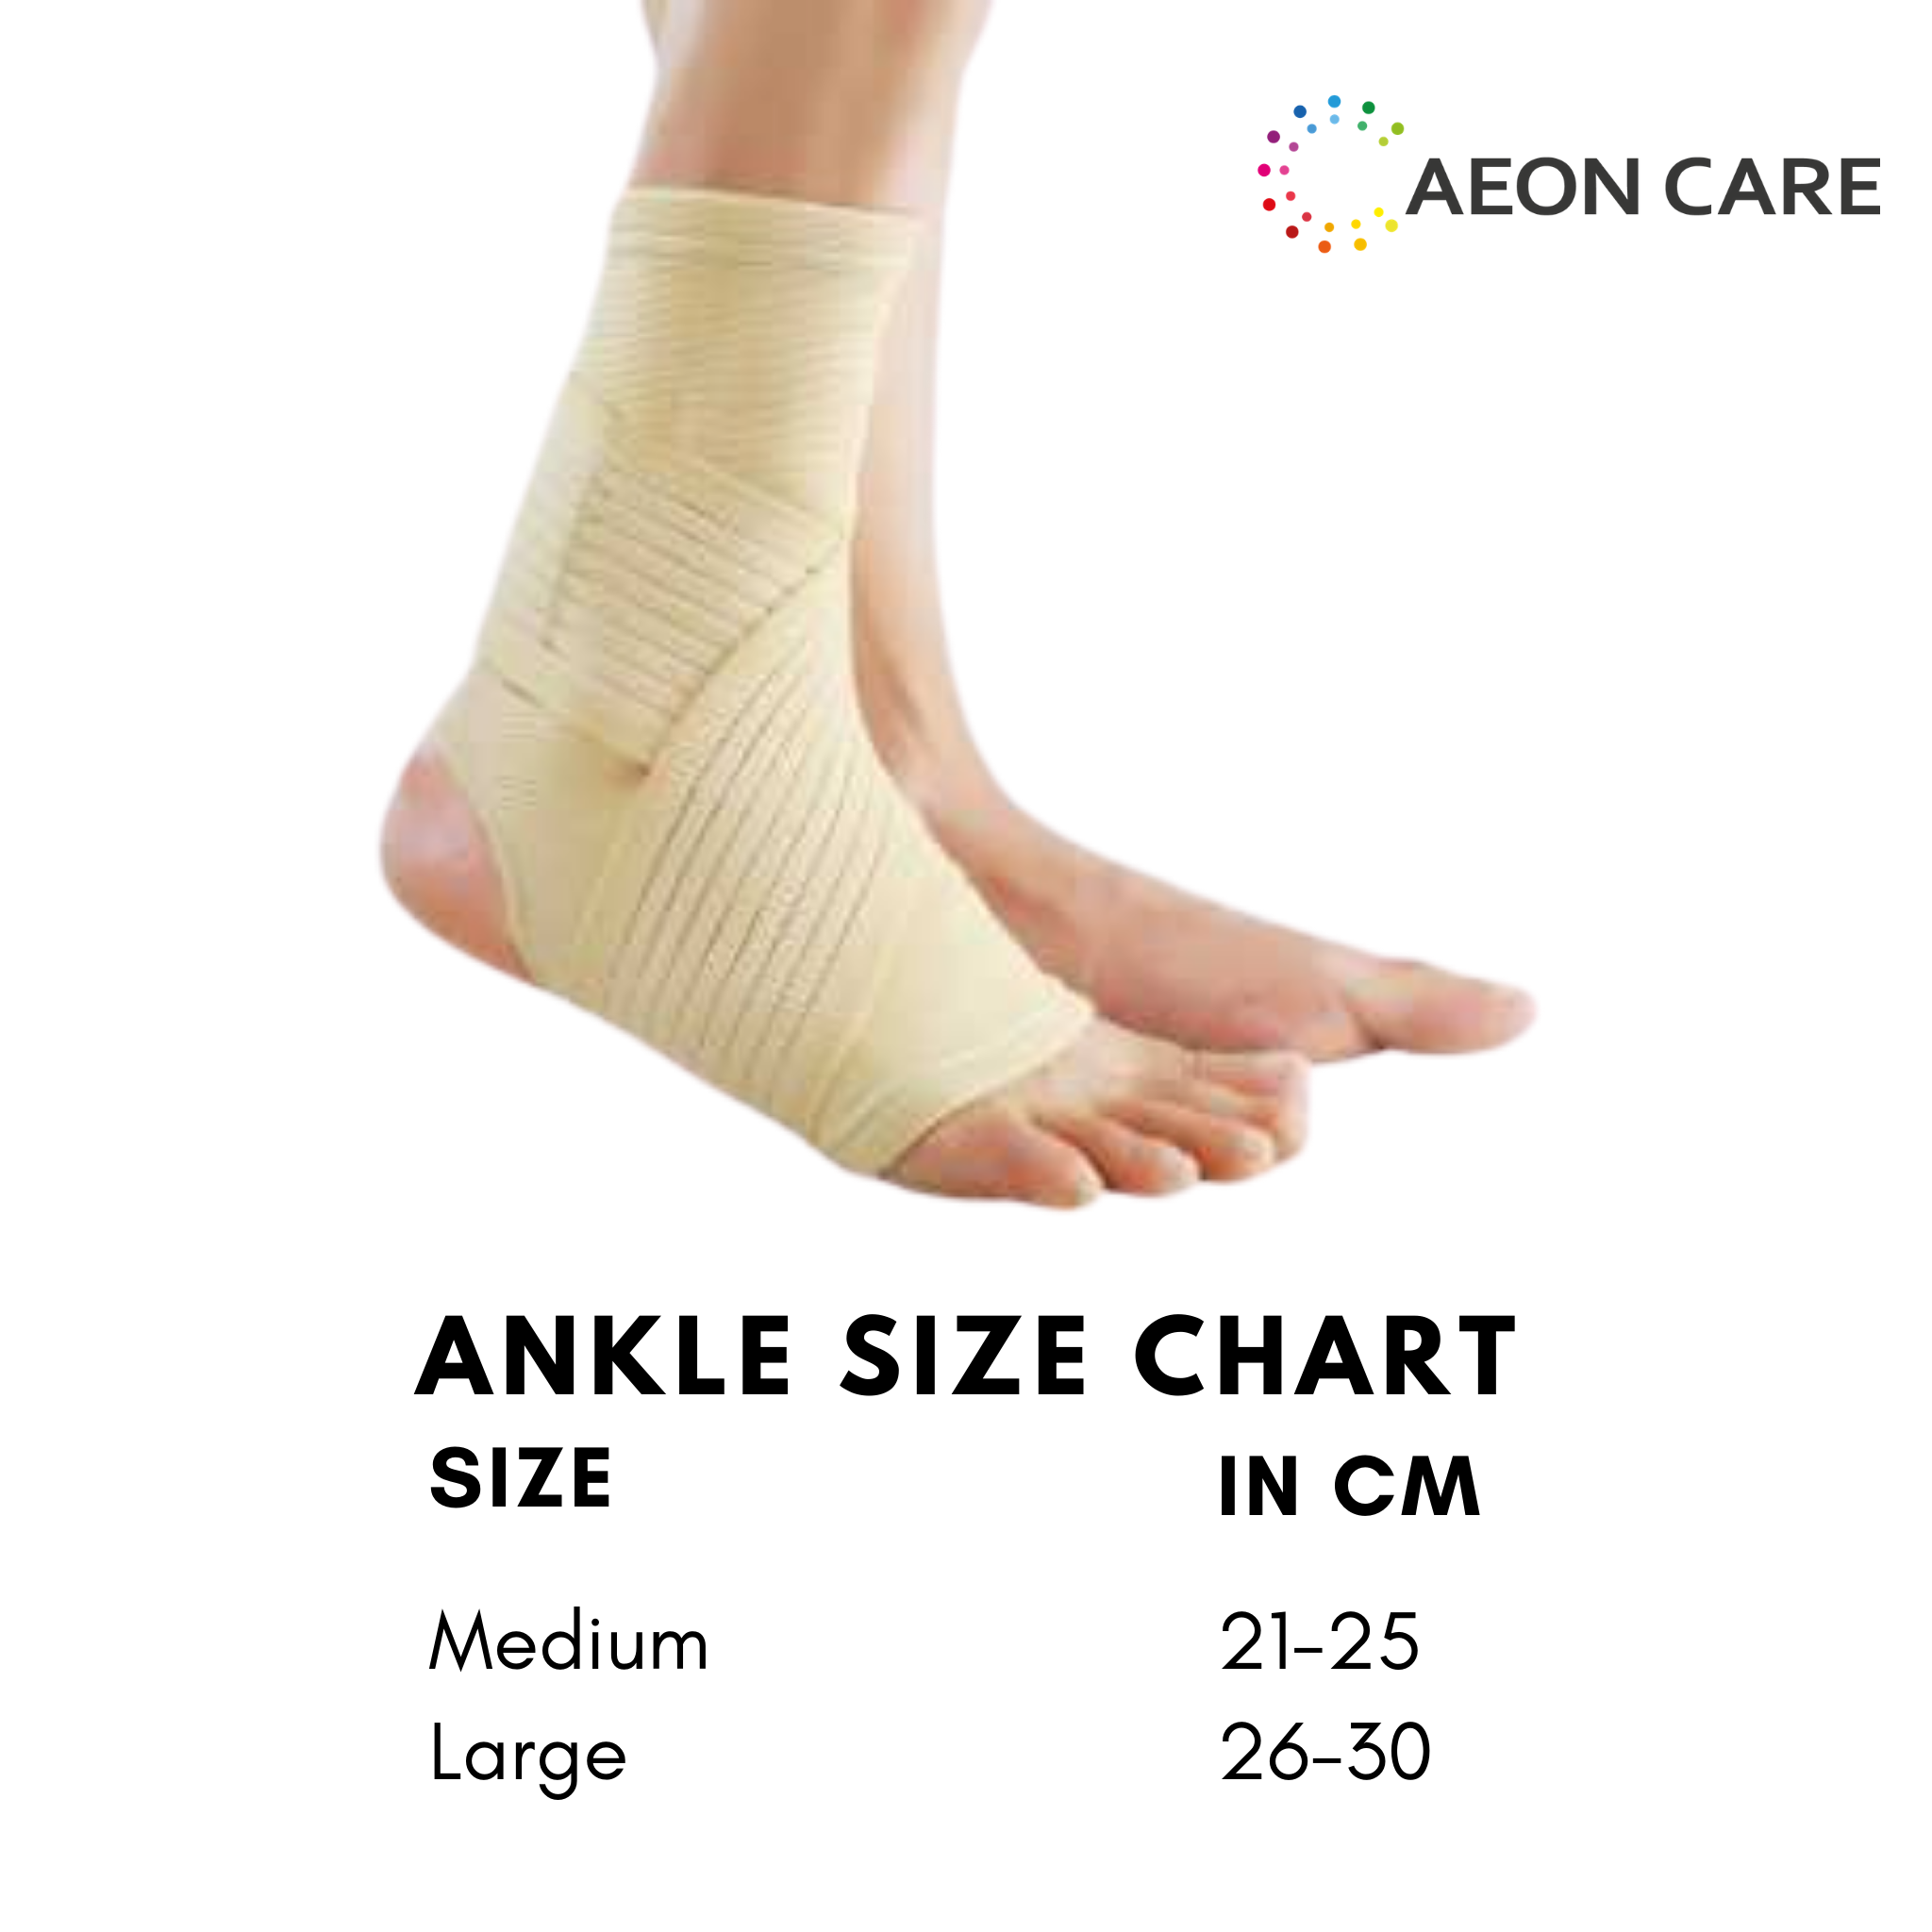 size chart for ankle binder. How to measure size for ankle binder